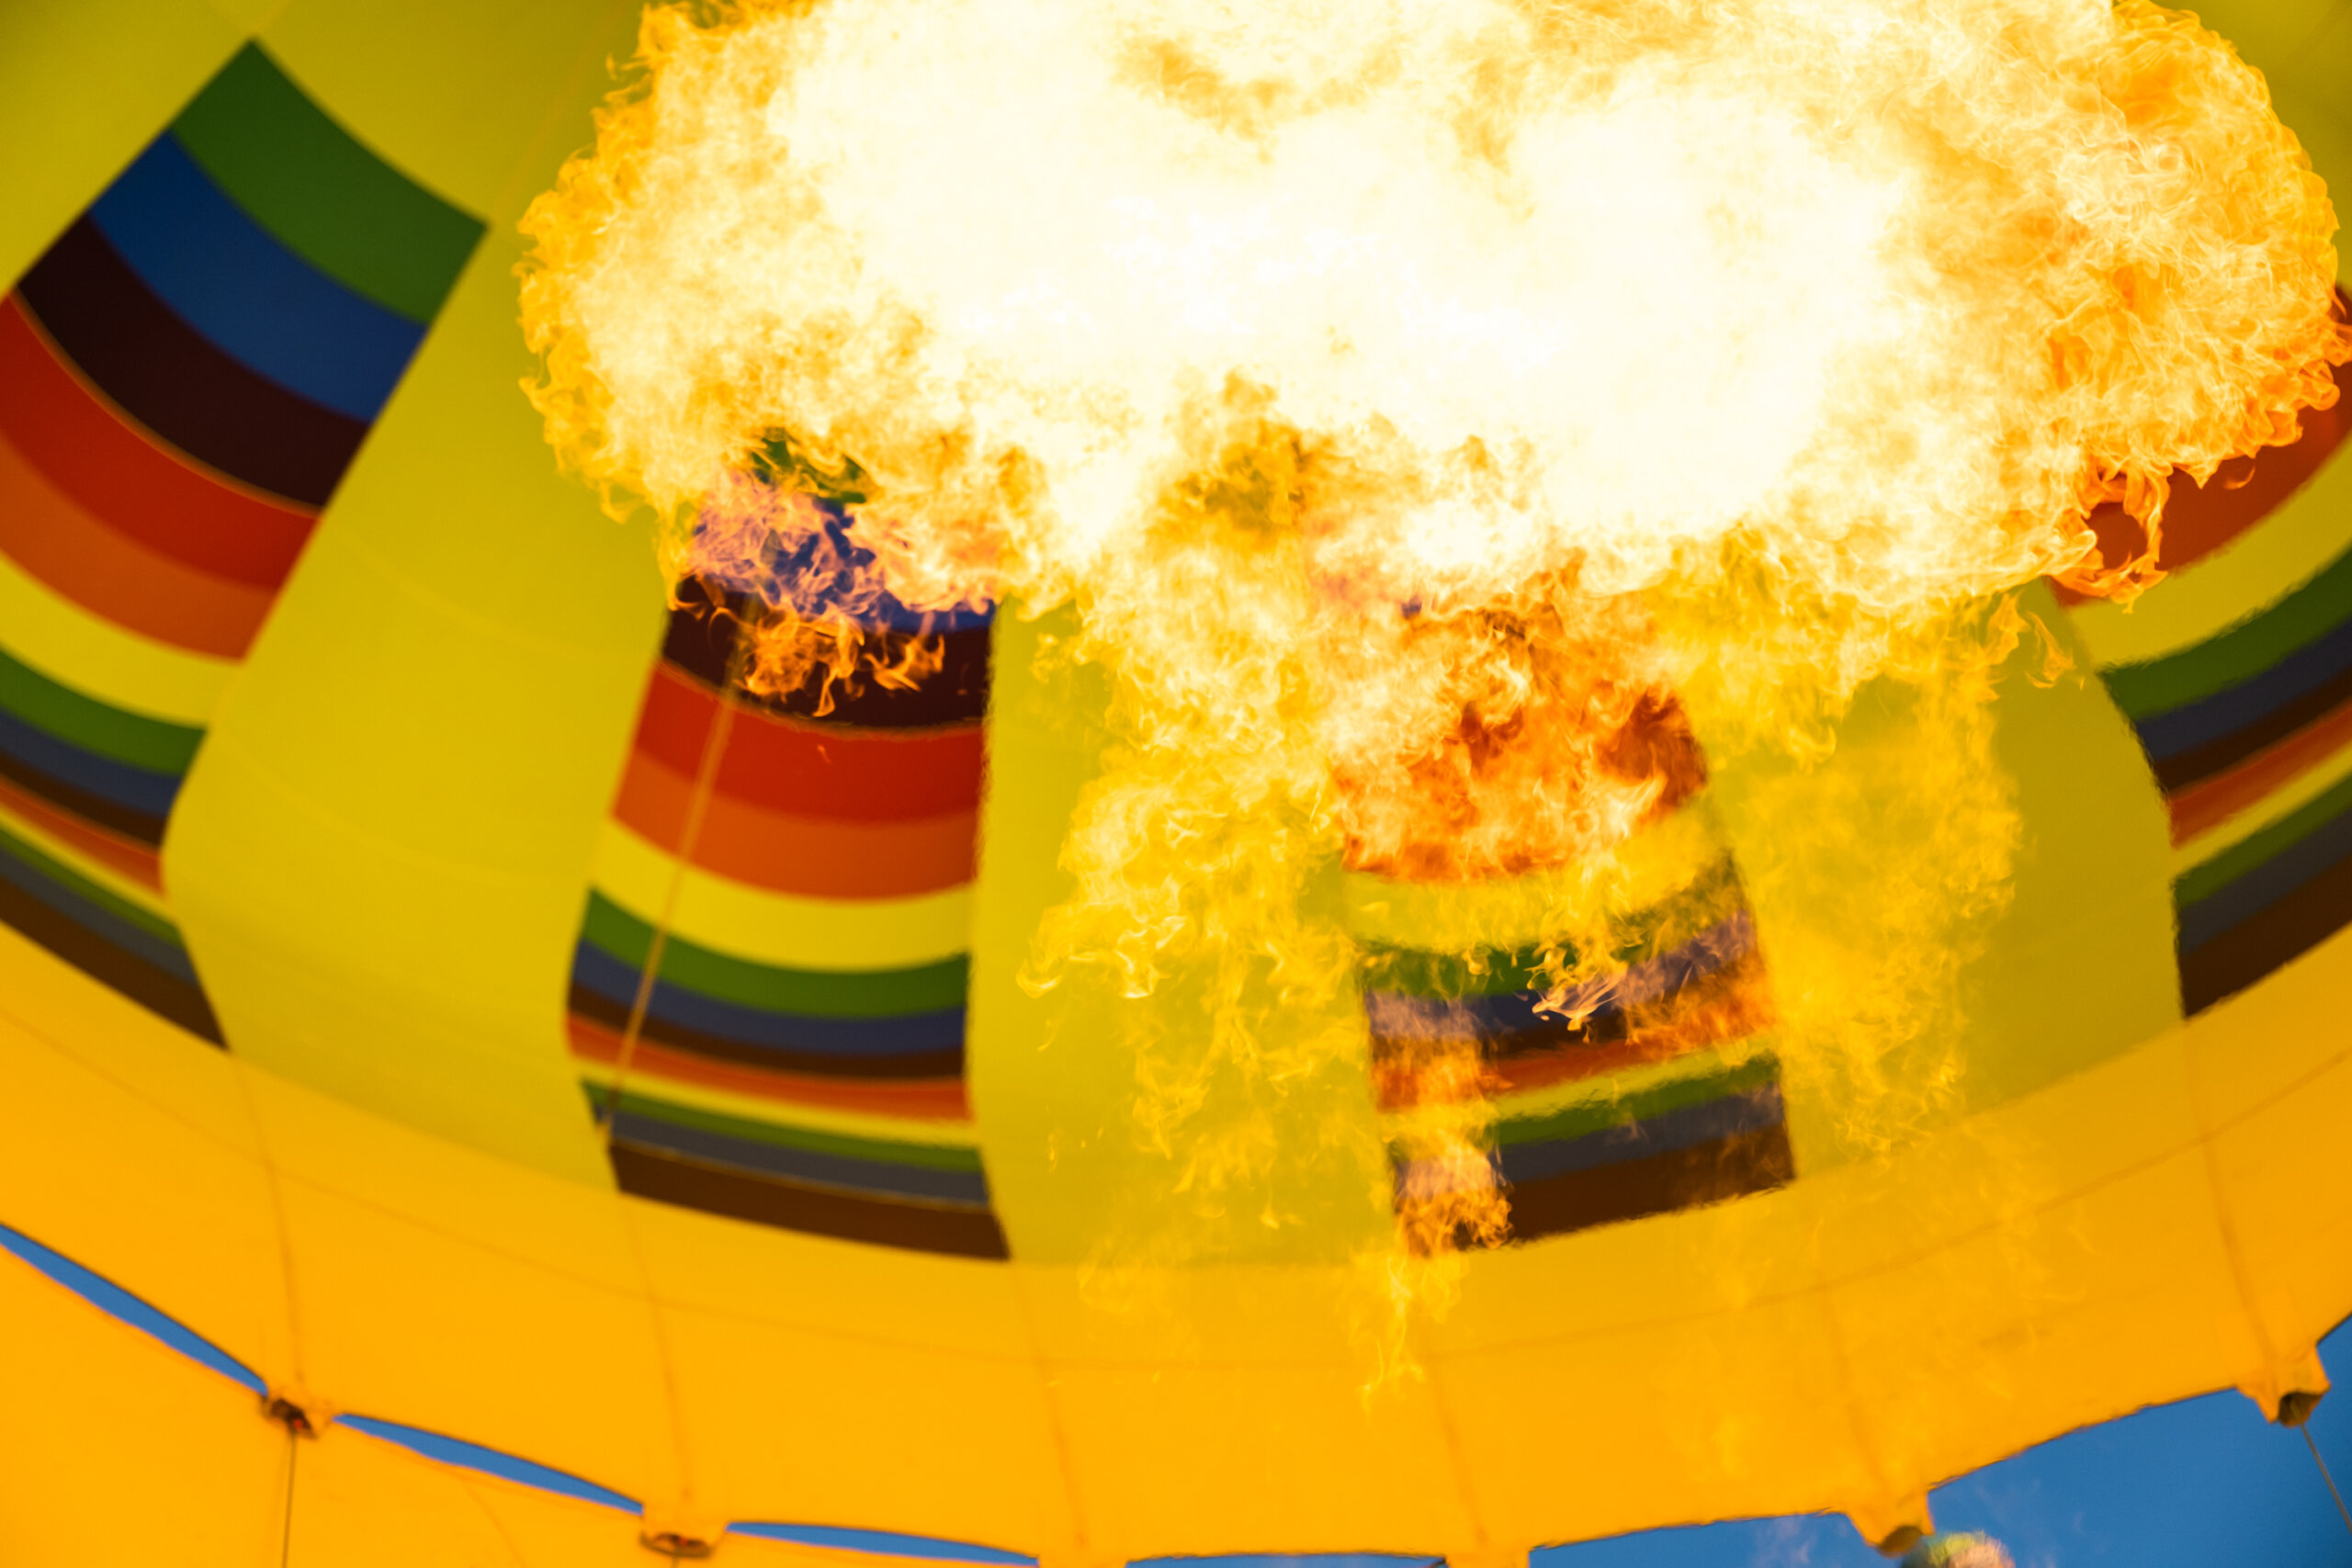 Fuel from the burners ignites to stabilize the hot air balloon's altitude